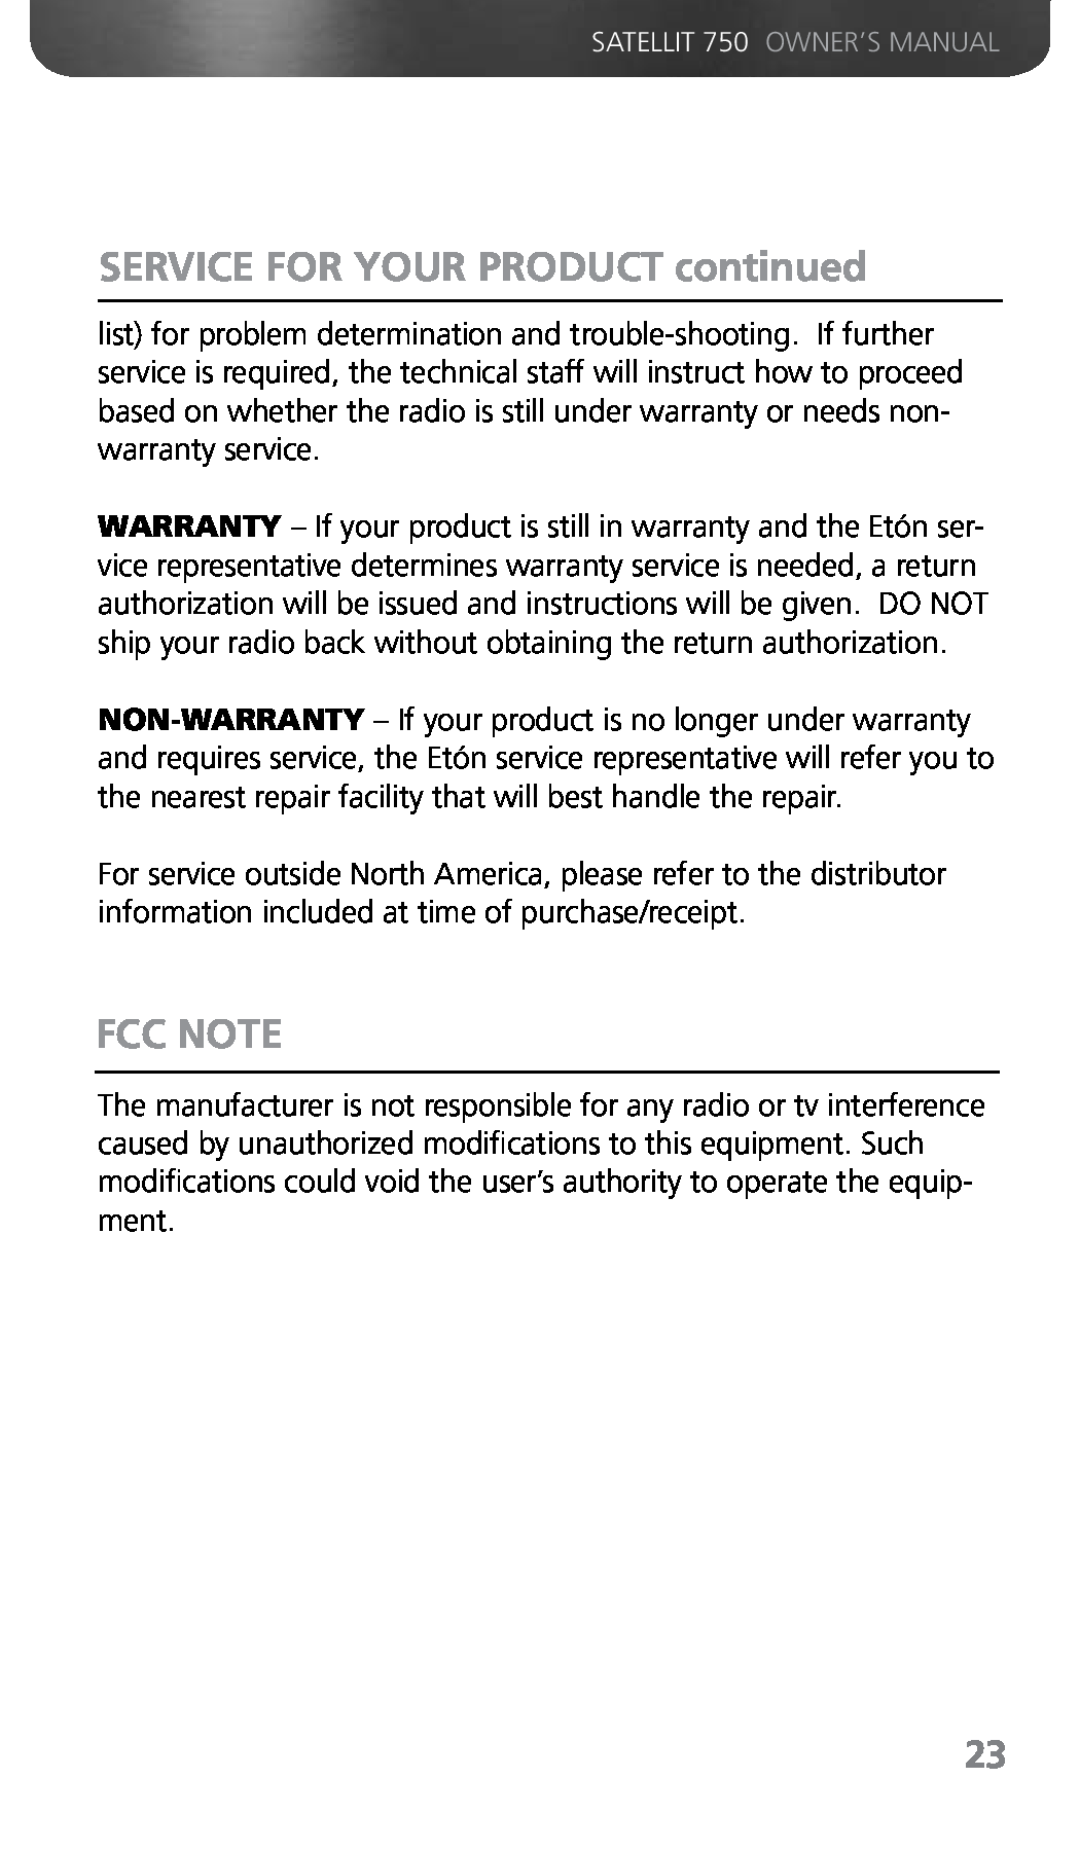 Grundig 750 owner manual SERVICE FOR YOUR PRODUCT continued, FCC Note 